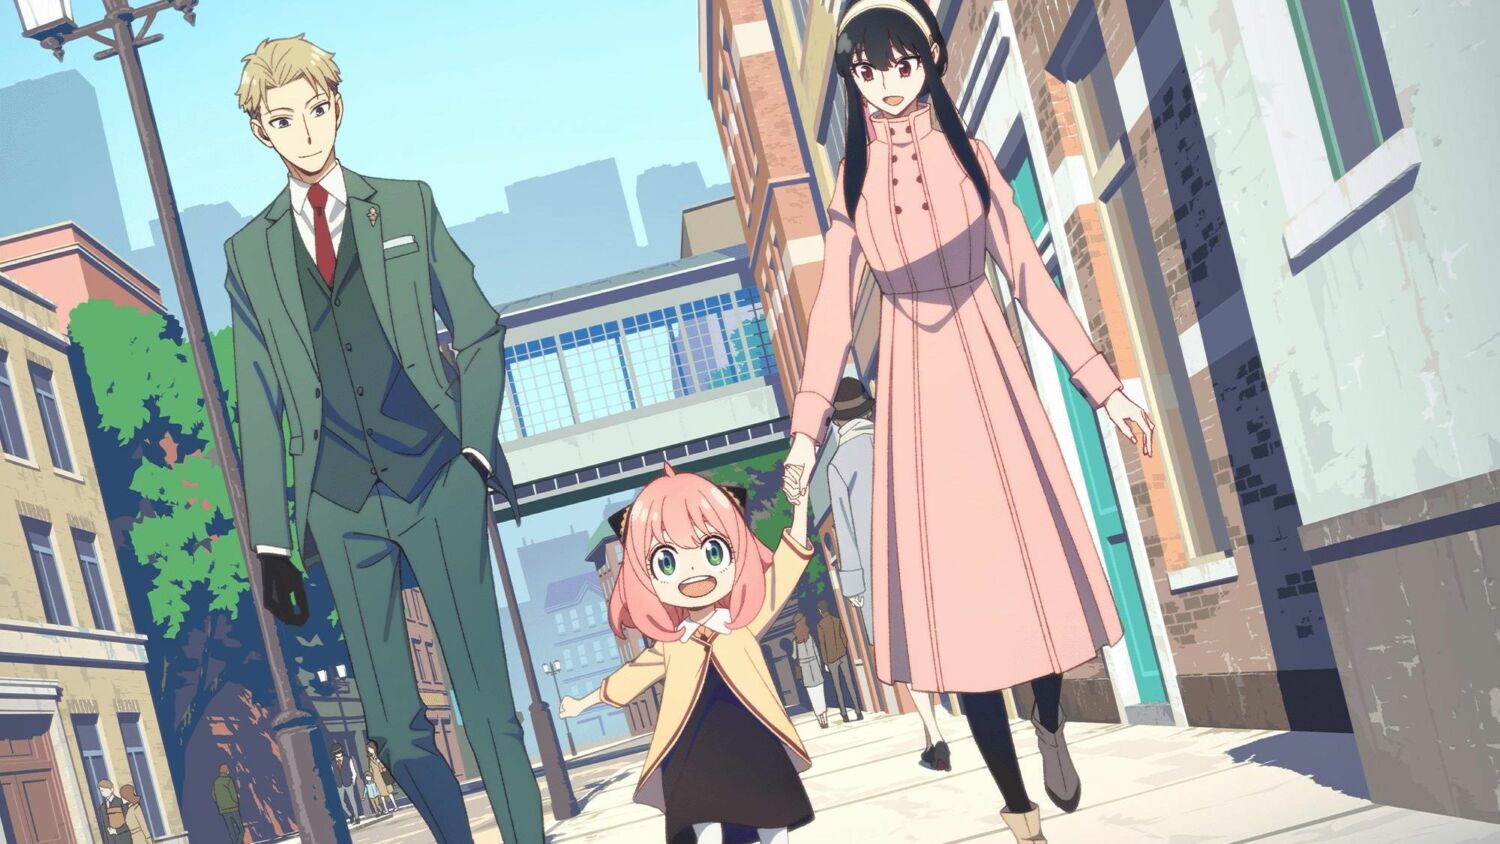 Spy x Family Season 2 and CODE: White Anime film set for release in 2023 -  Hindustan Times